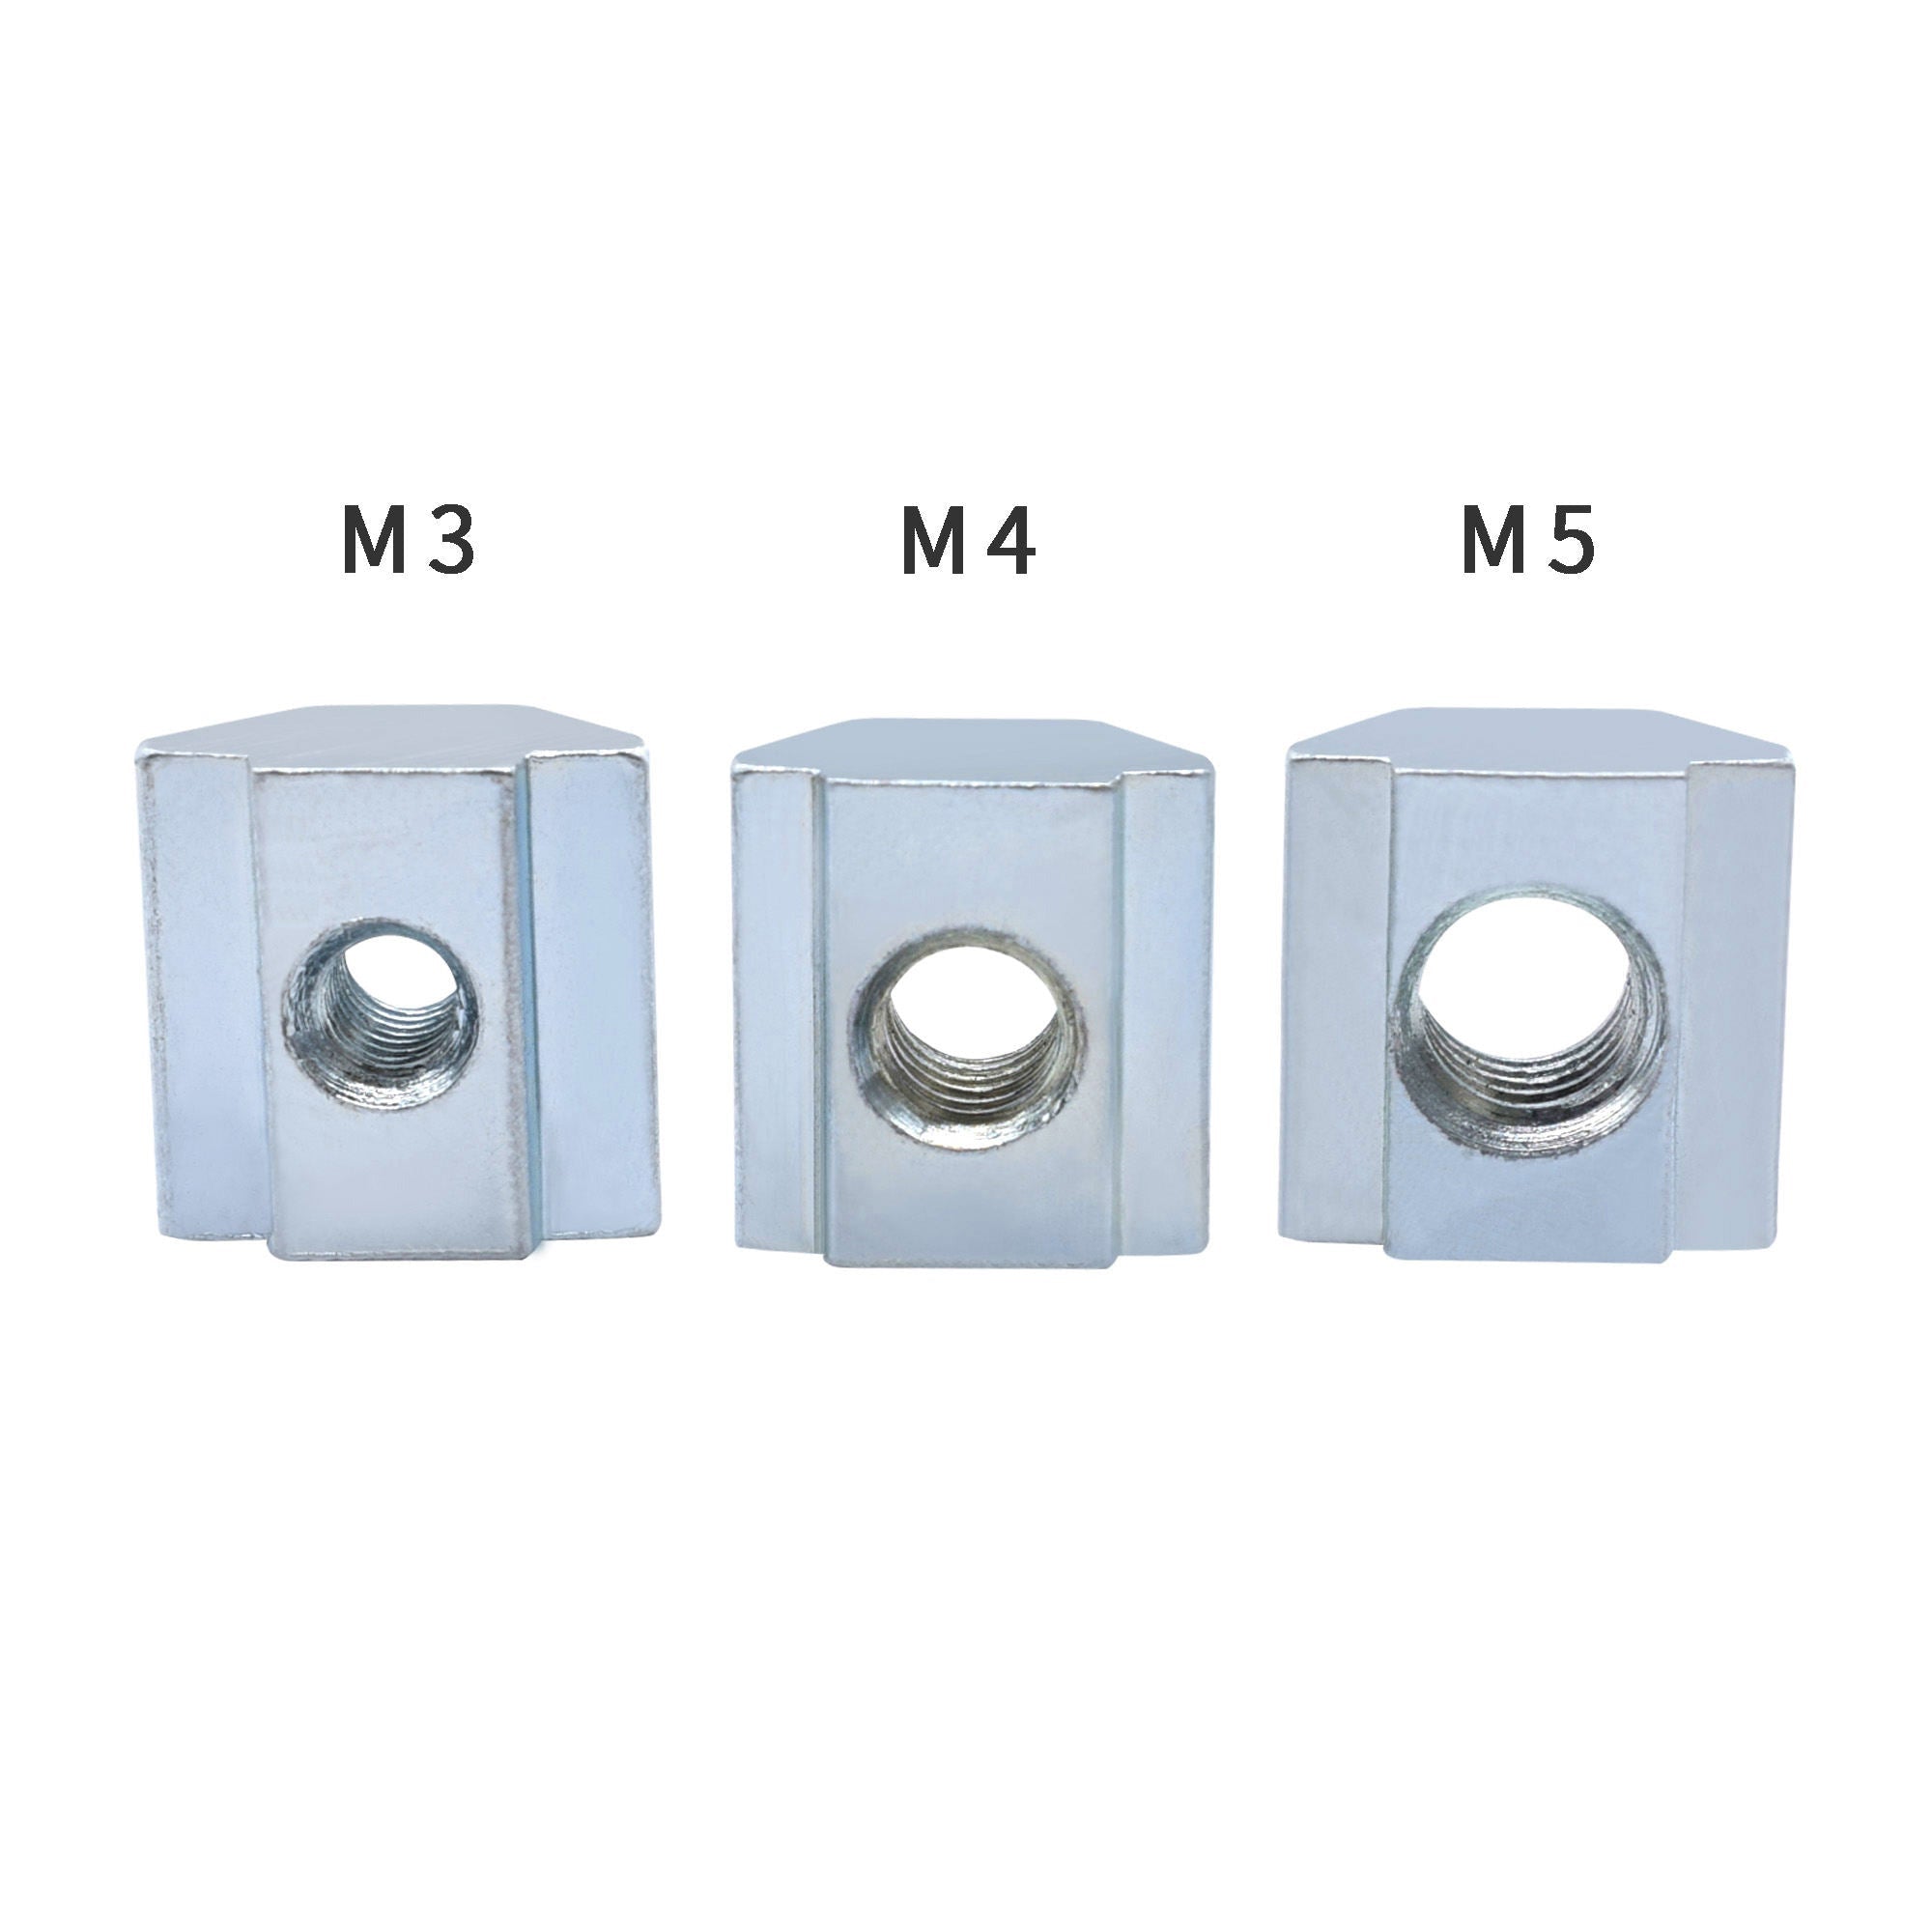 10pc T Slot Square Stainless Steel Nuts (EU Standard)